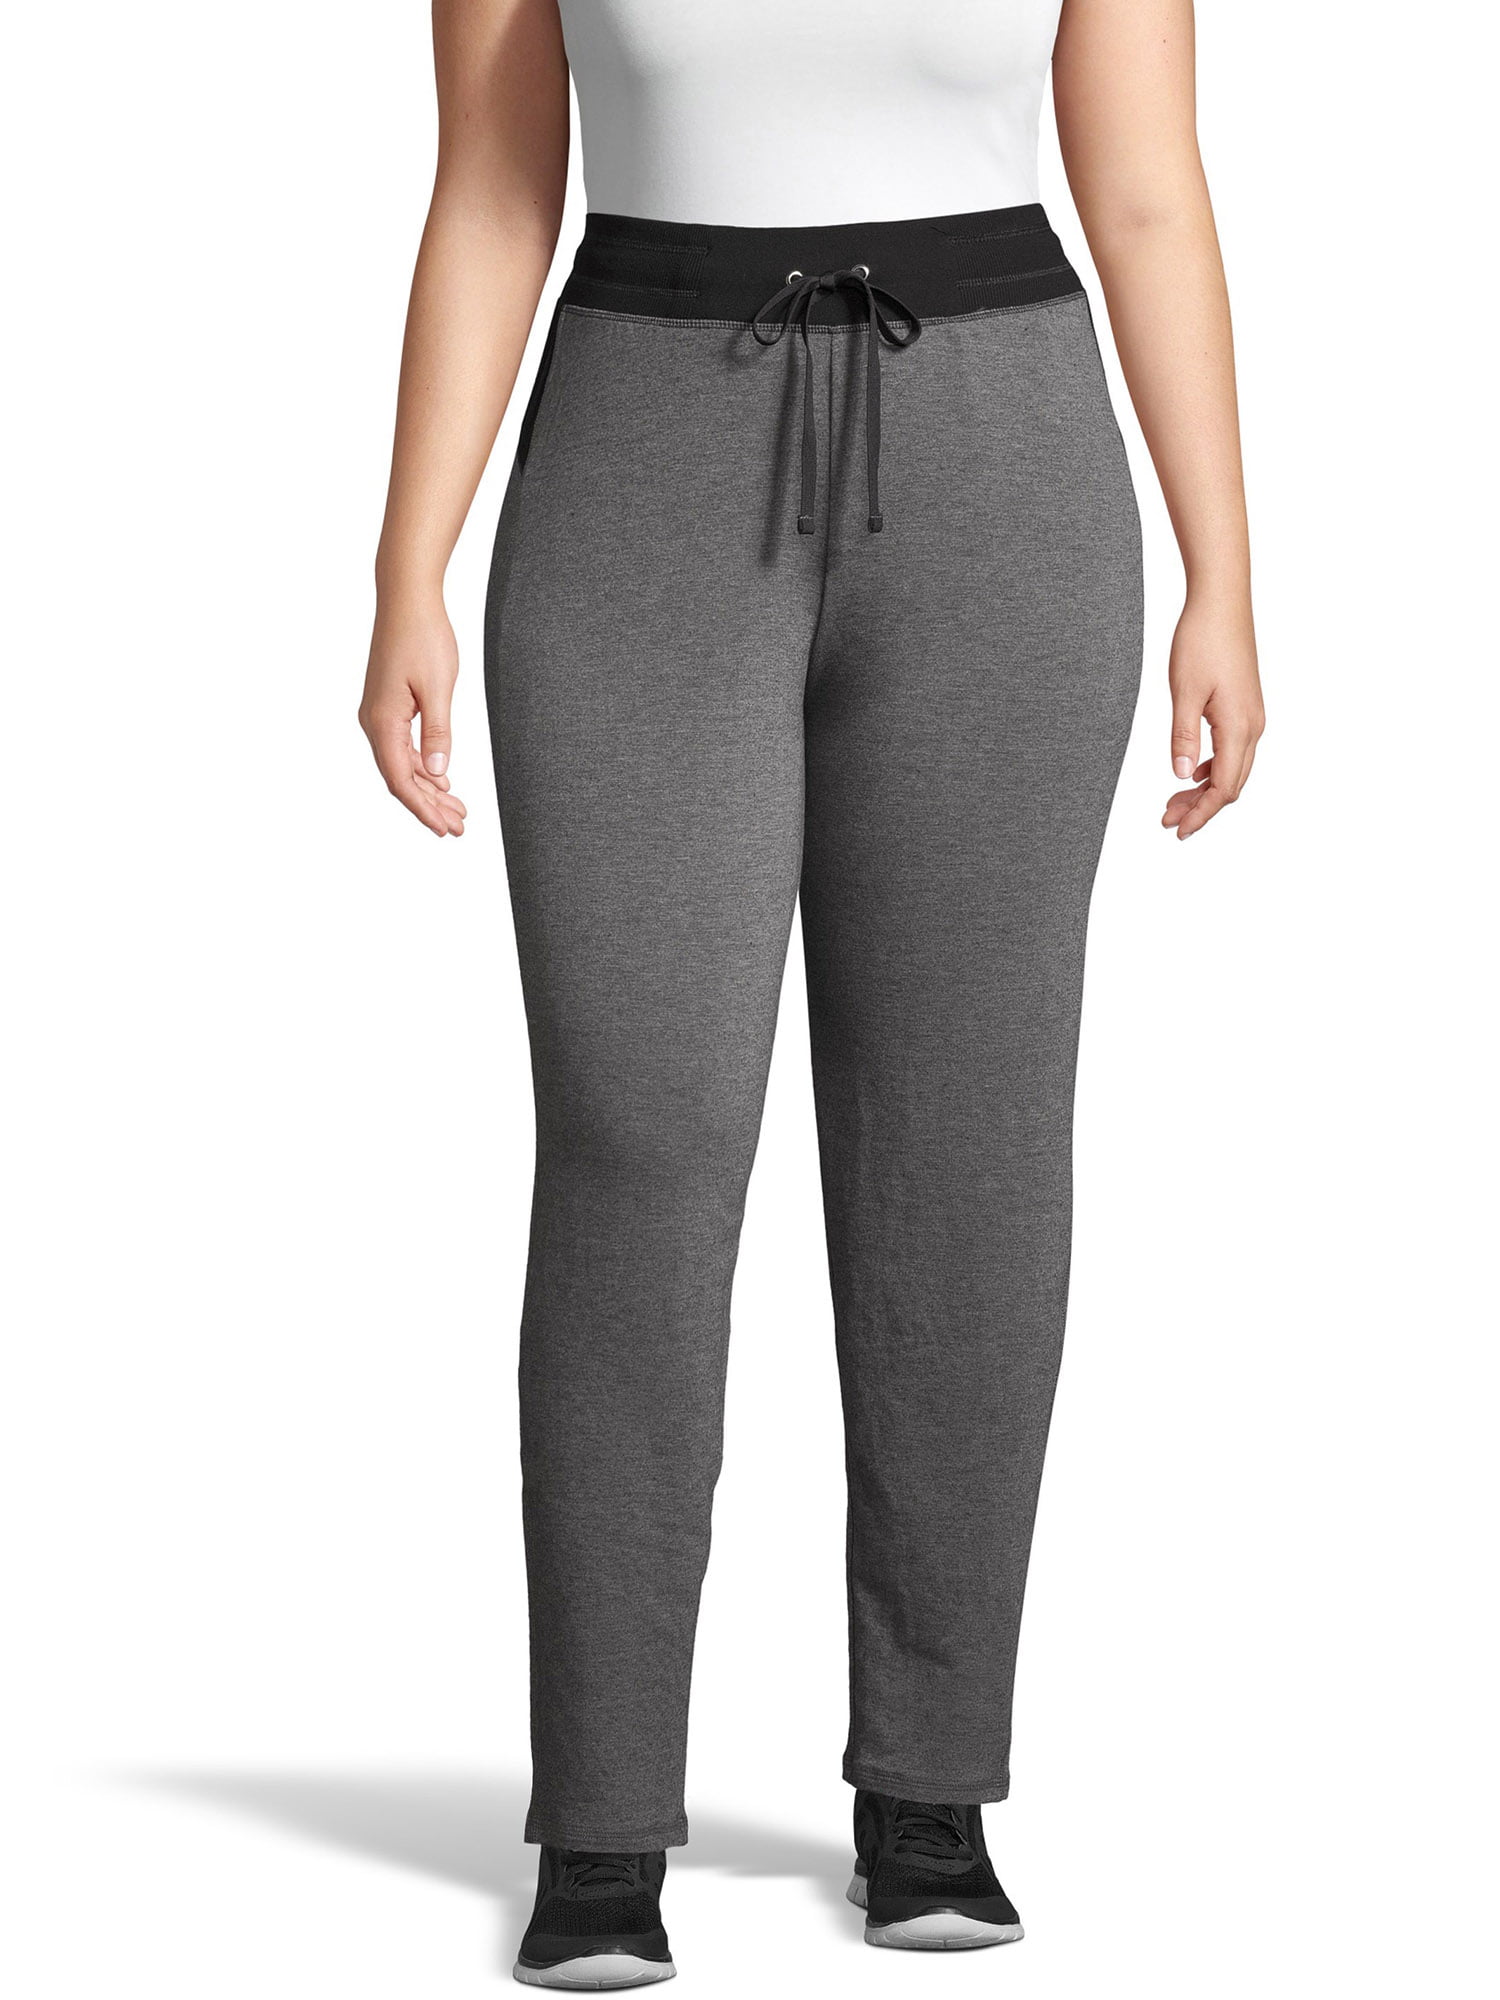 Just My Size Women's Plus Size French Terry Performance Sweatpants